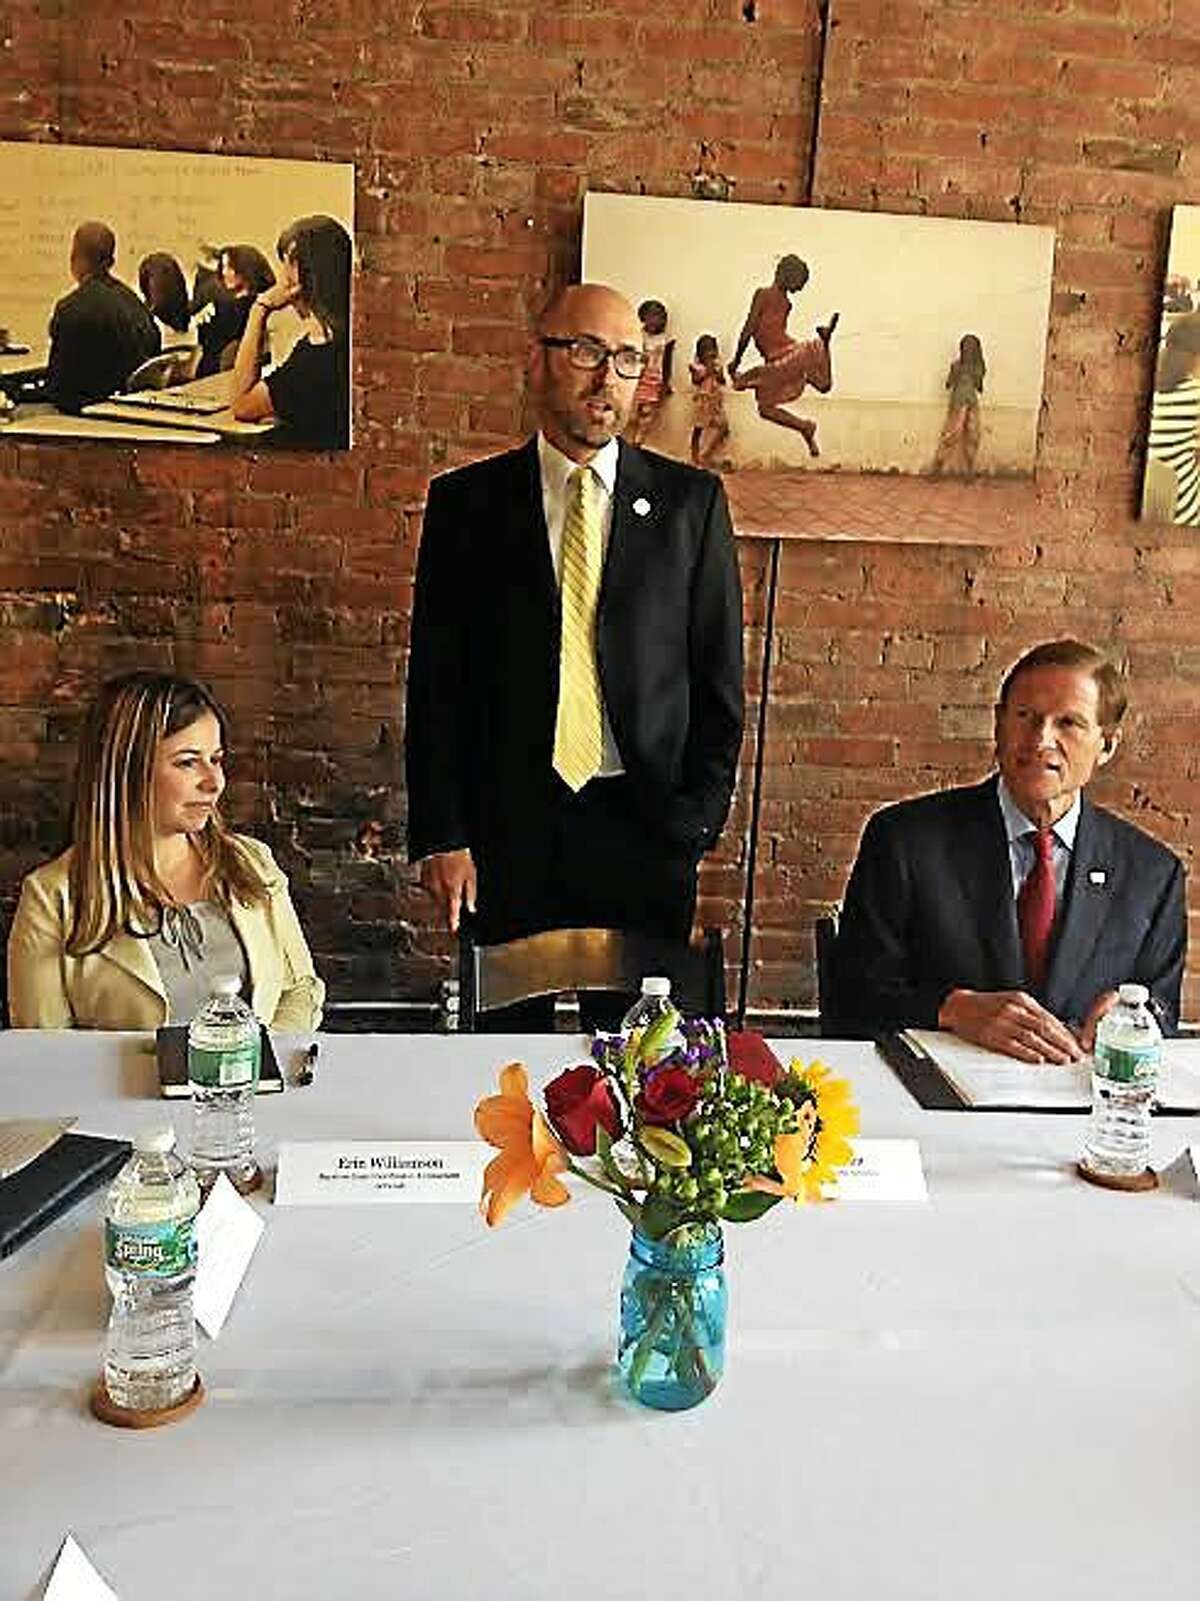 At left, Erin Williamson, Connecticut survivor support coordinator, Love 146; Jim Ehrman, executive director, North America, Love 146; and U.S. Sen. Richard Blumenthal - part of a panel that Monday discussed child trafficking in the U.S., including Connecticut and efforts to help the victims.